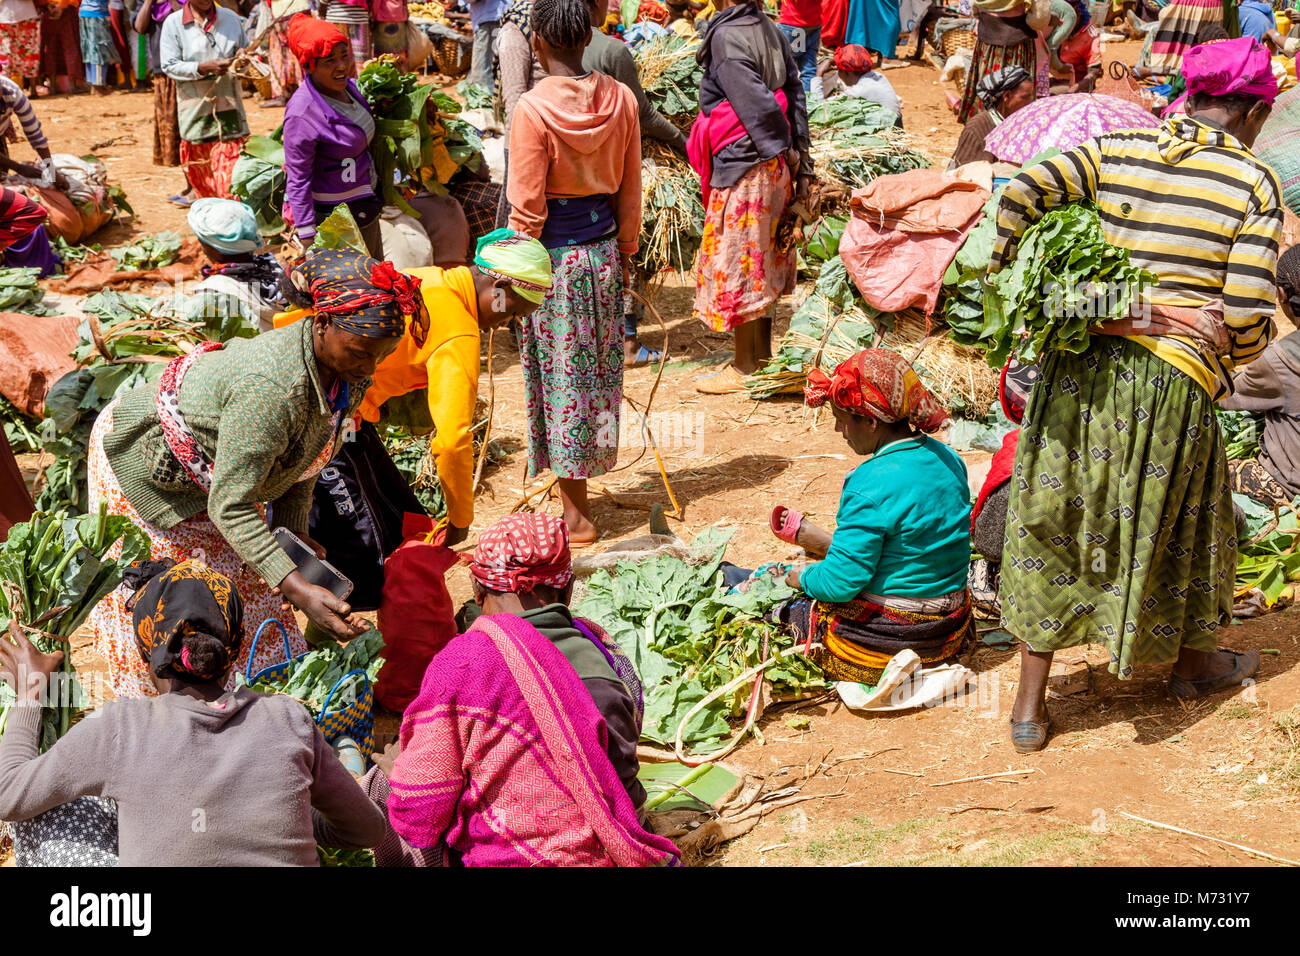 Dorze Women Selling Vegetables At The Famous Saturday Market In The Village Of Chencha, High Up In The Guge Mountains, Gamo Gofa Zone, Ethiopia Stock Photo